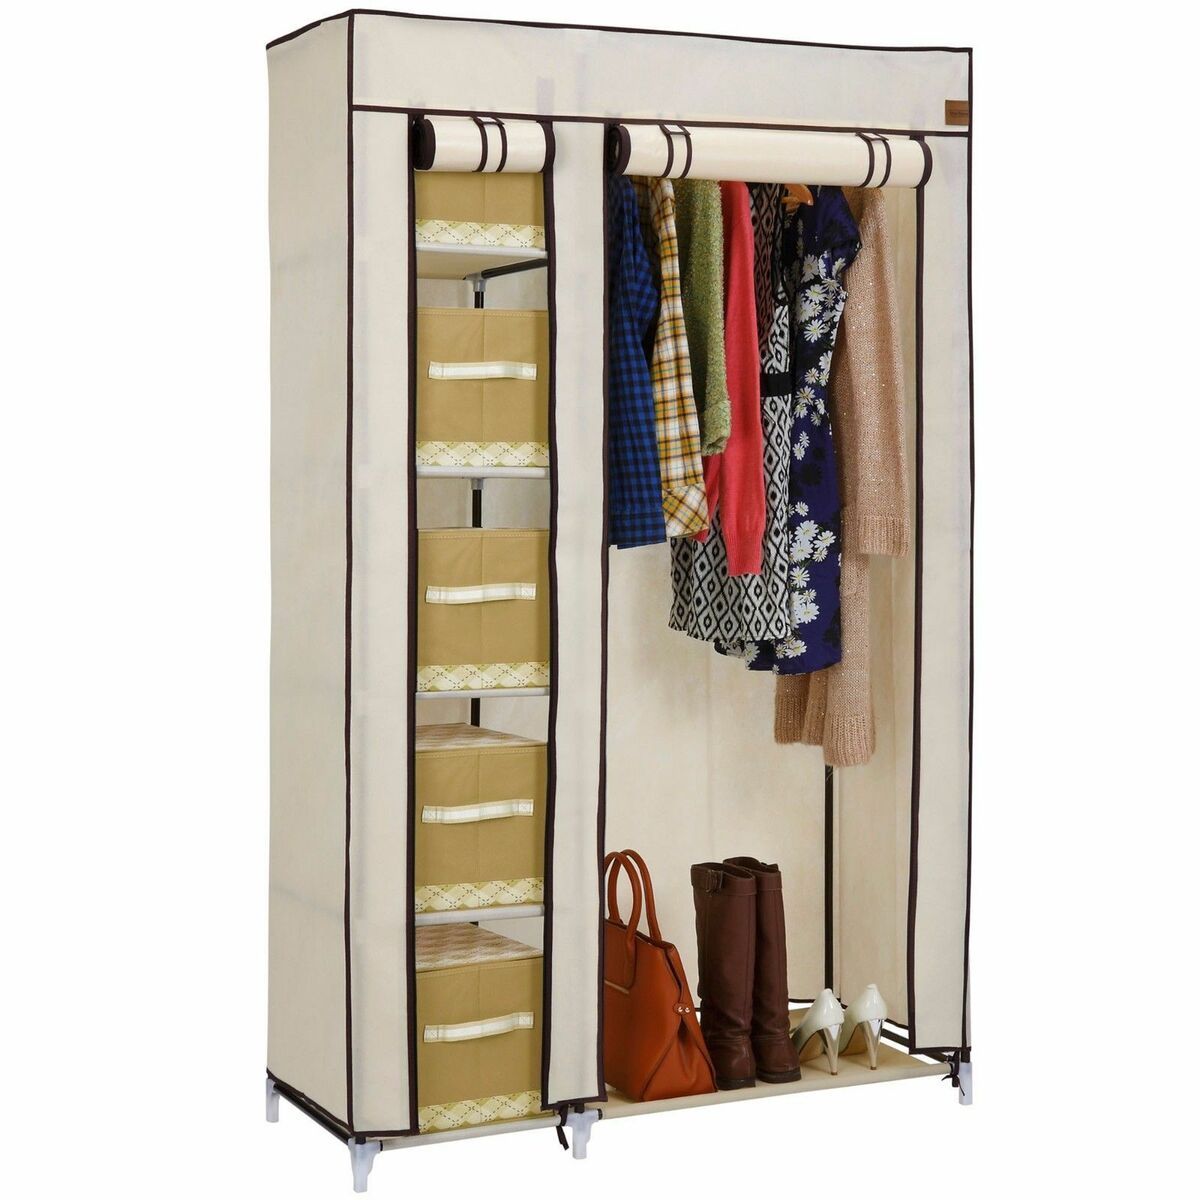 Double Canvas Wardrobe Clothes Rack Hanging Rail Storage Shelves Cupboard  Beige | Ebay Within Double Rail Canvas Wardrobes (View 2 of 15)